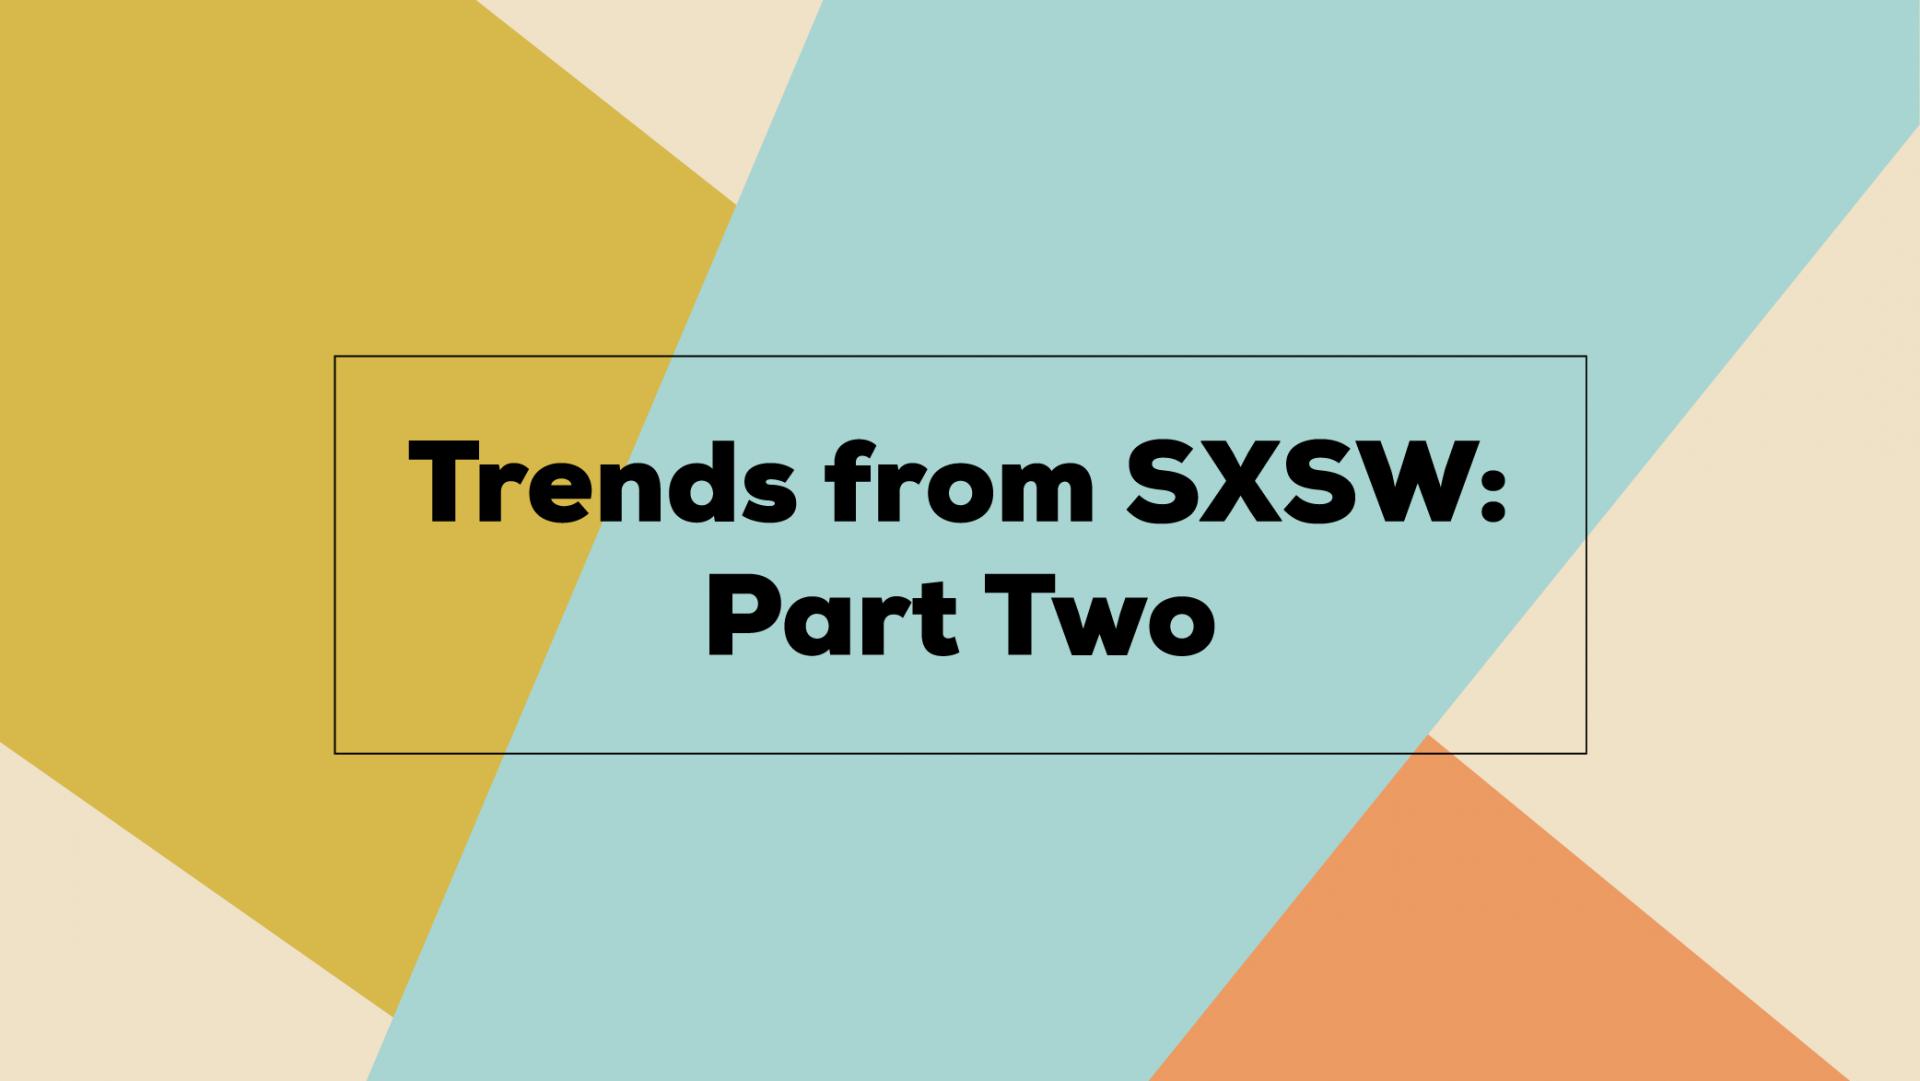 Trends from SXSW Part Two